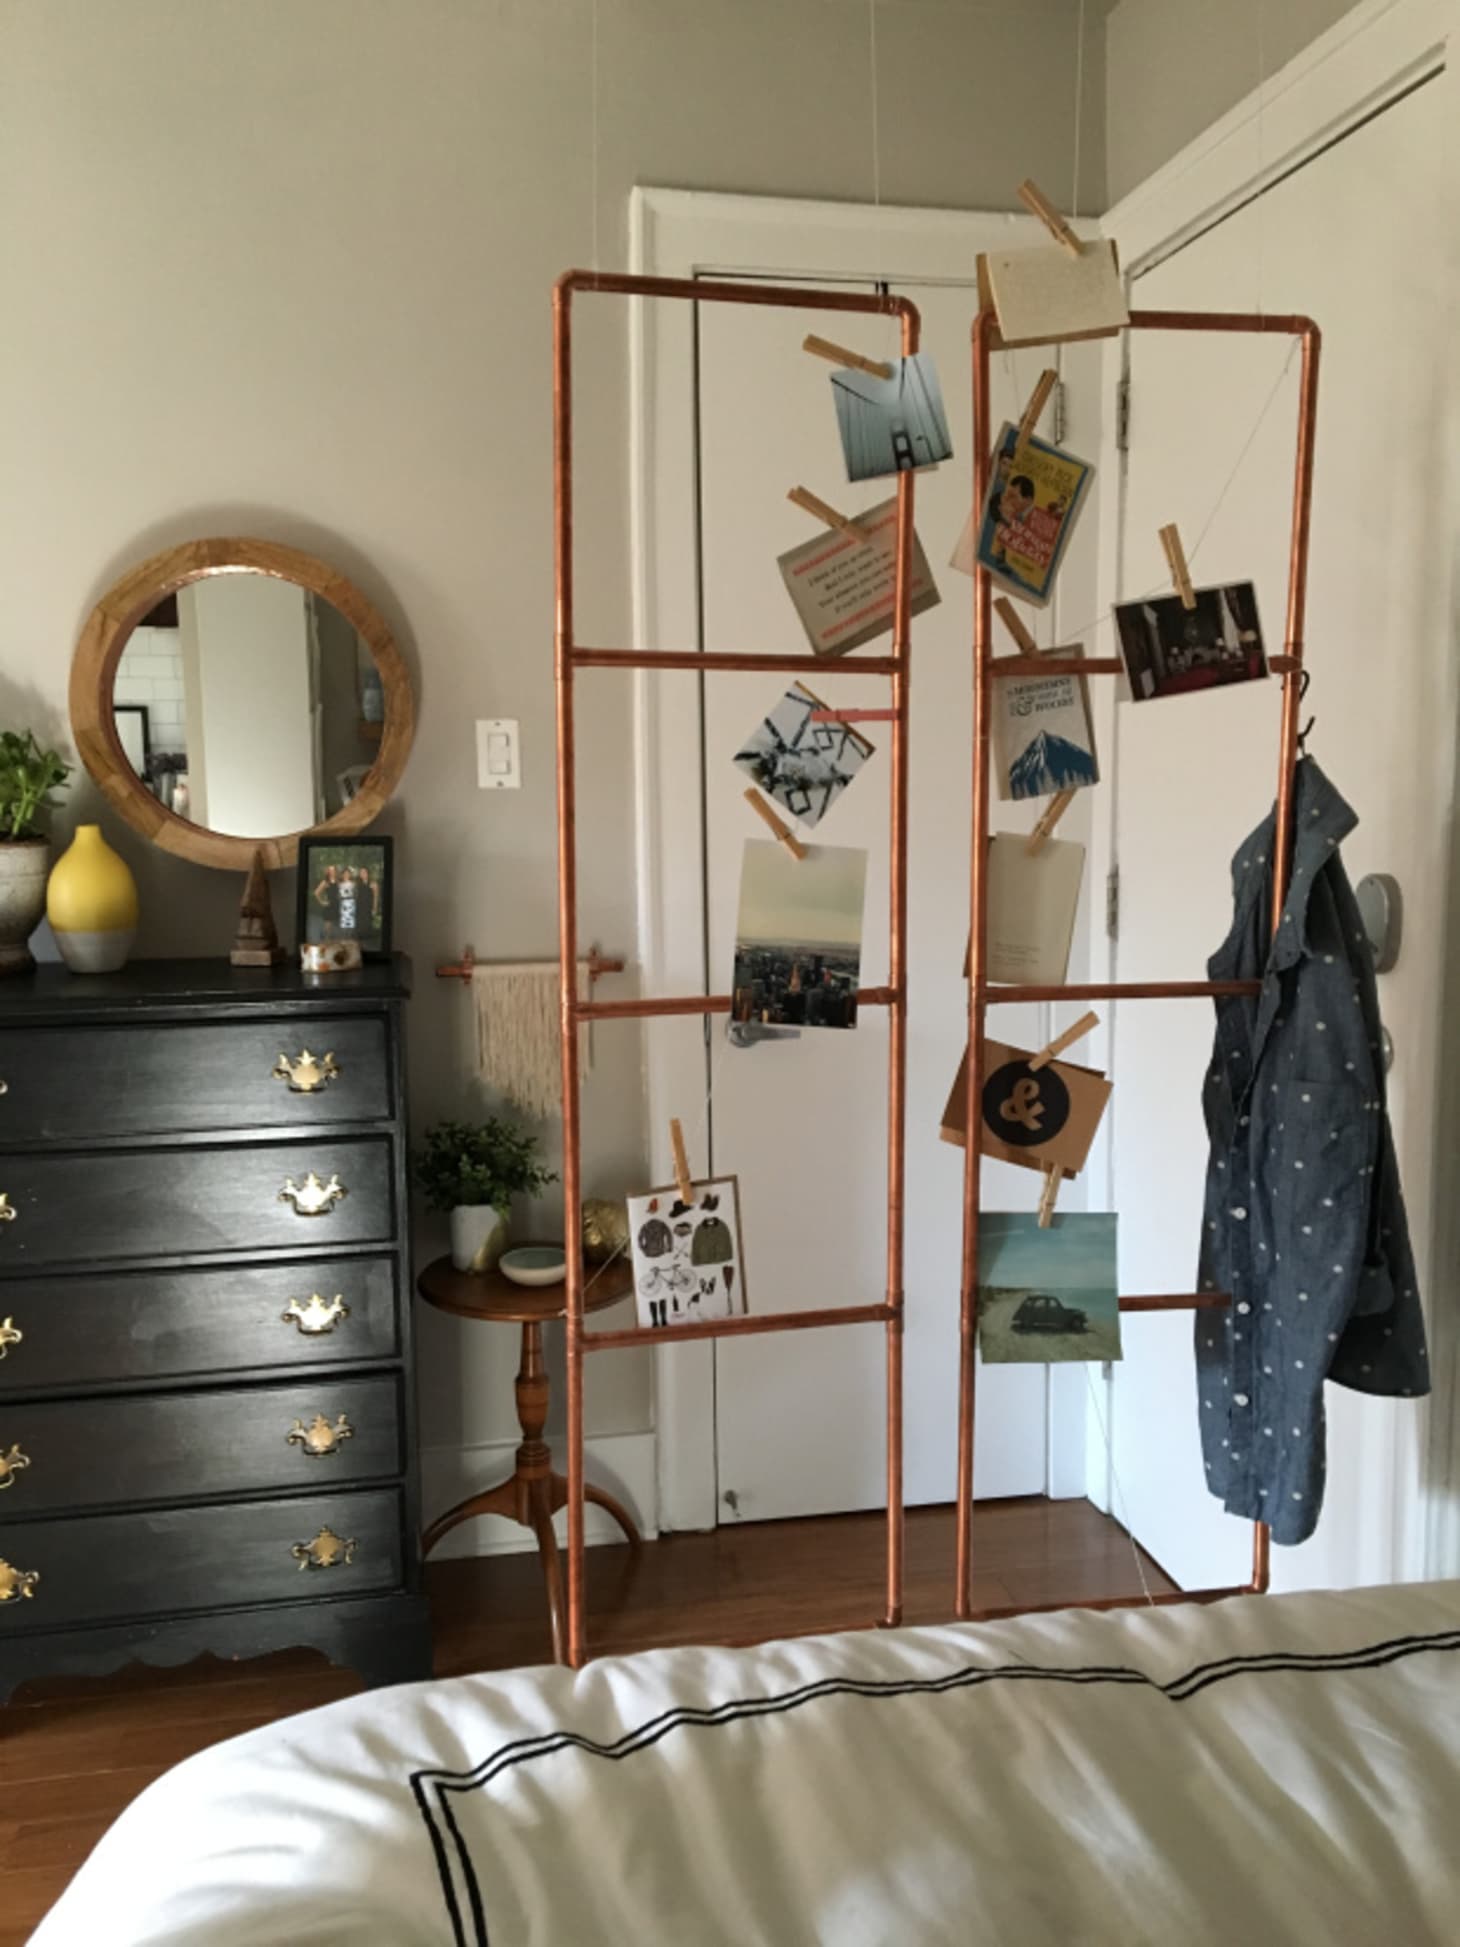 How To Make A Clever Easy Diy Copper Room Divider